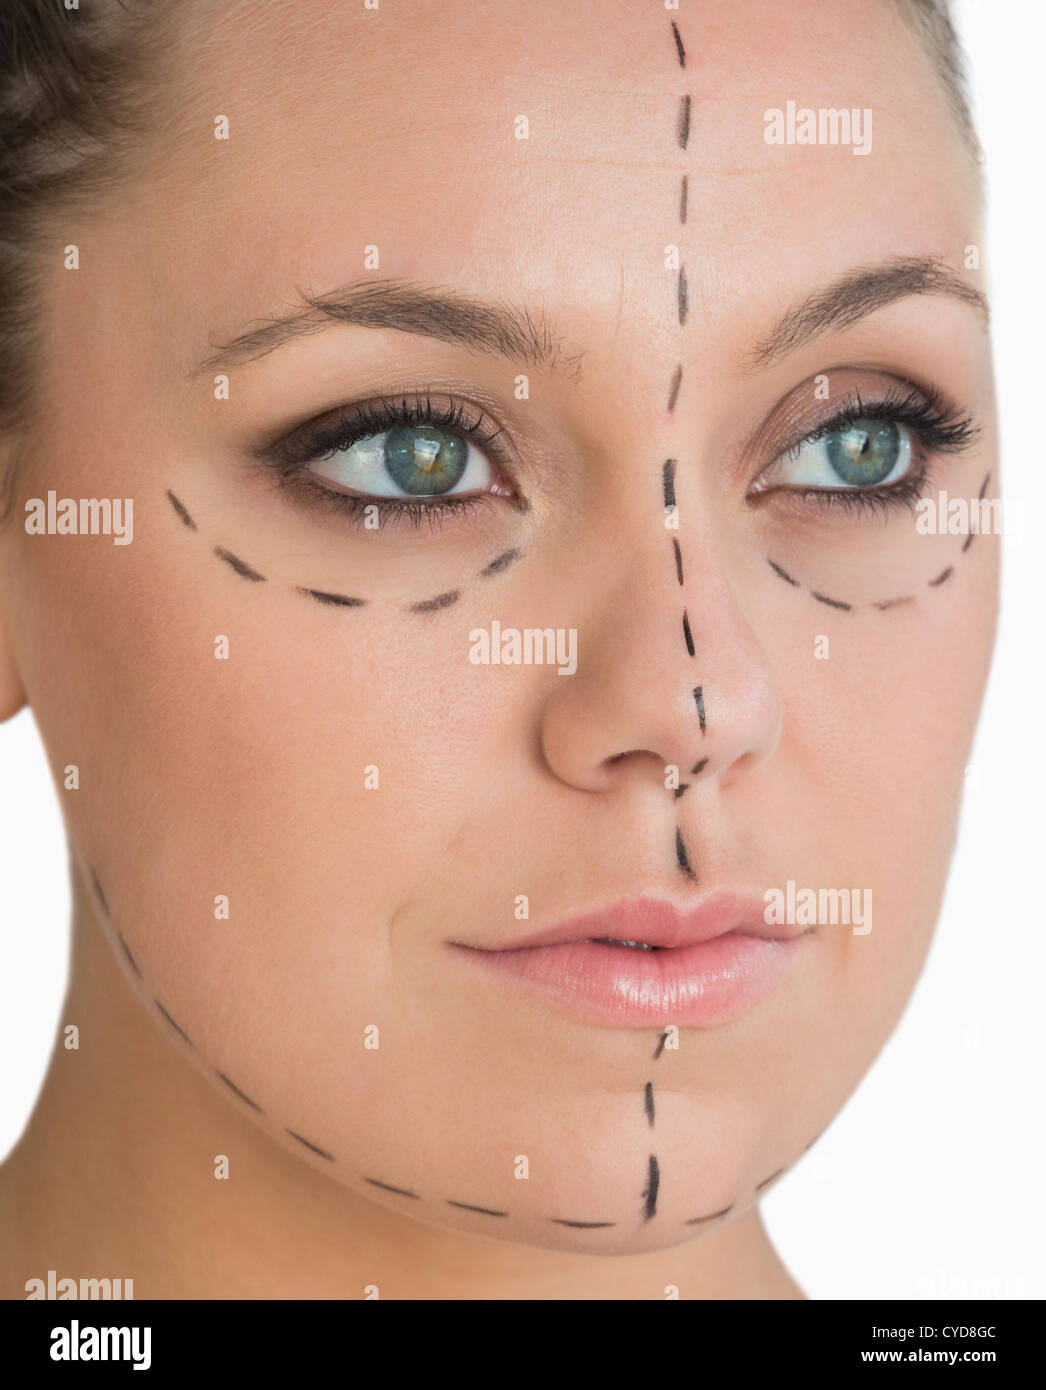 Calm woman ready for face lift Stock Photo